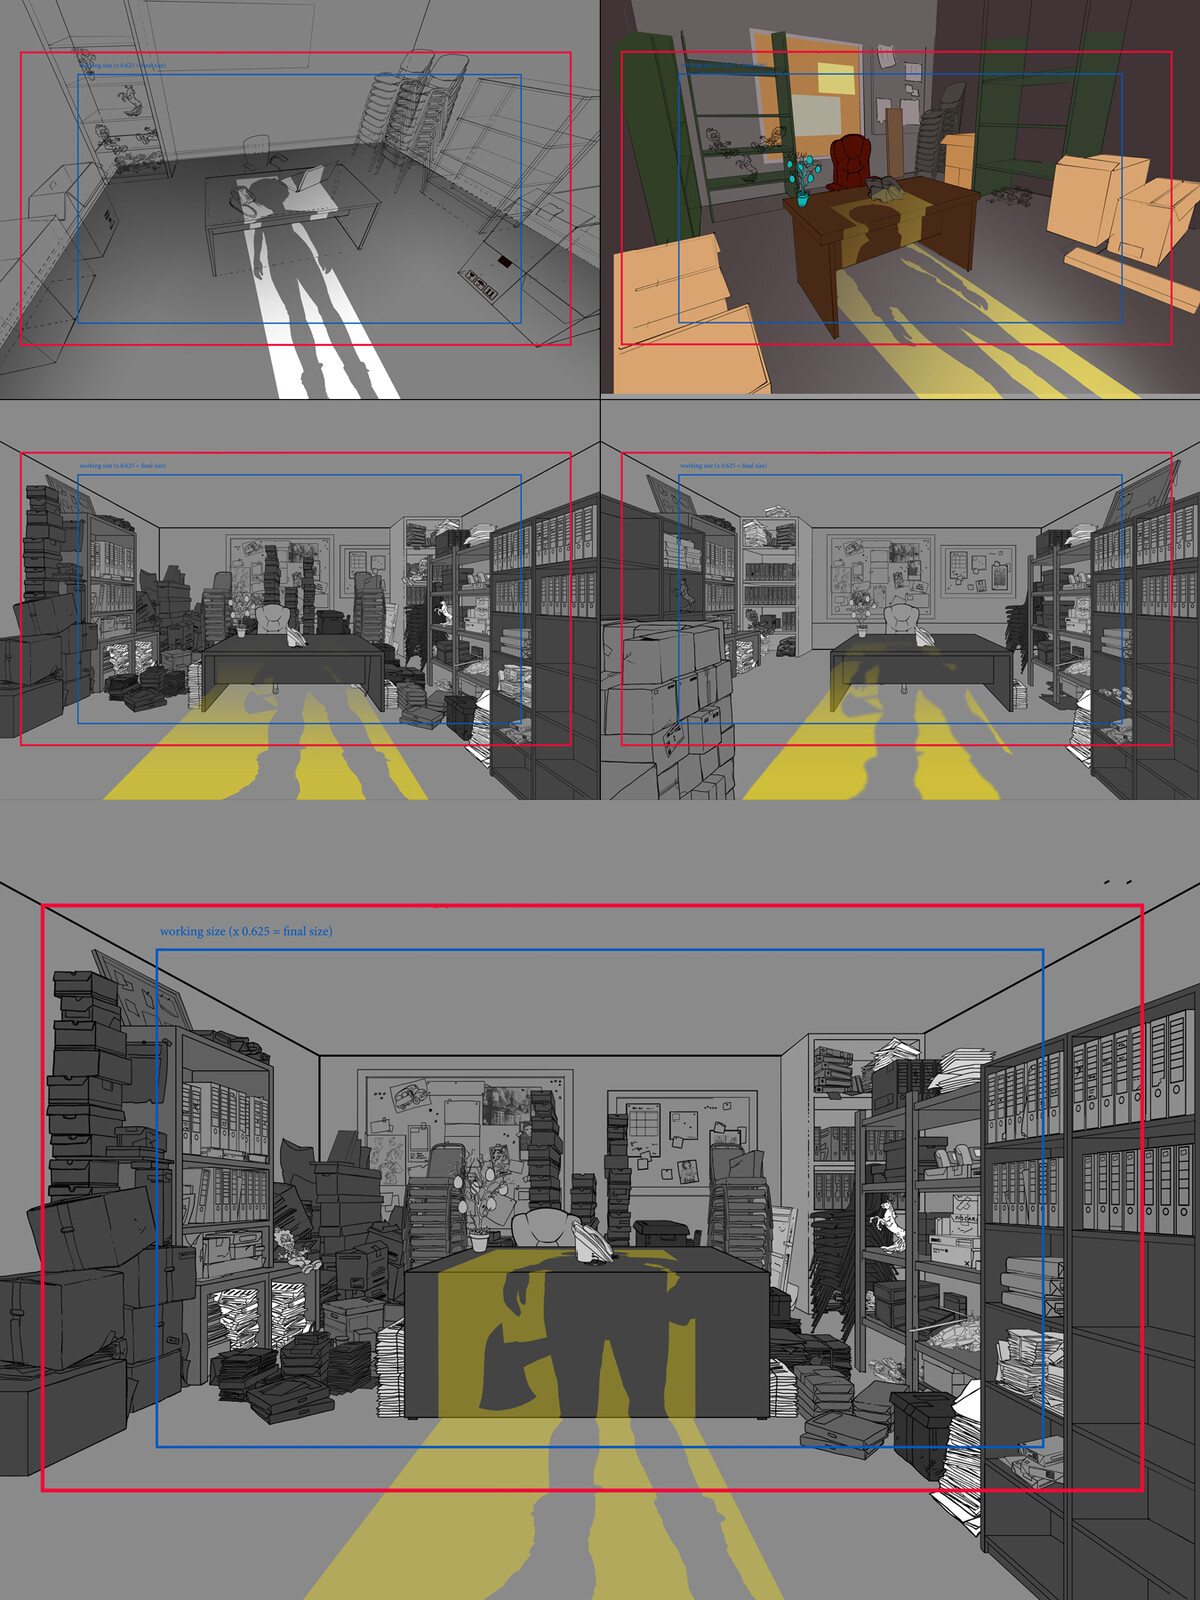 Top 4 thumbnails: previous versions
Bottom: final lineart for a scene, with the light from the doorway suggested for the animators.